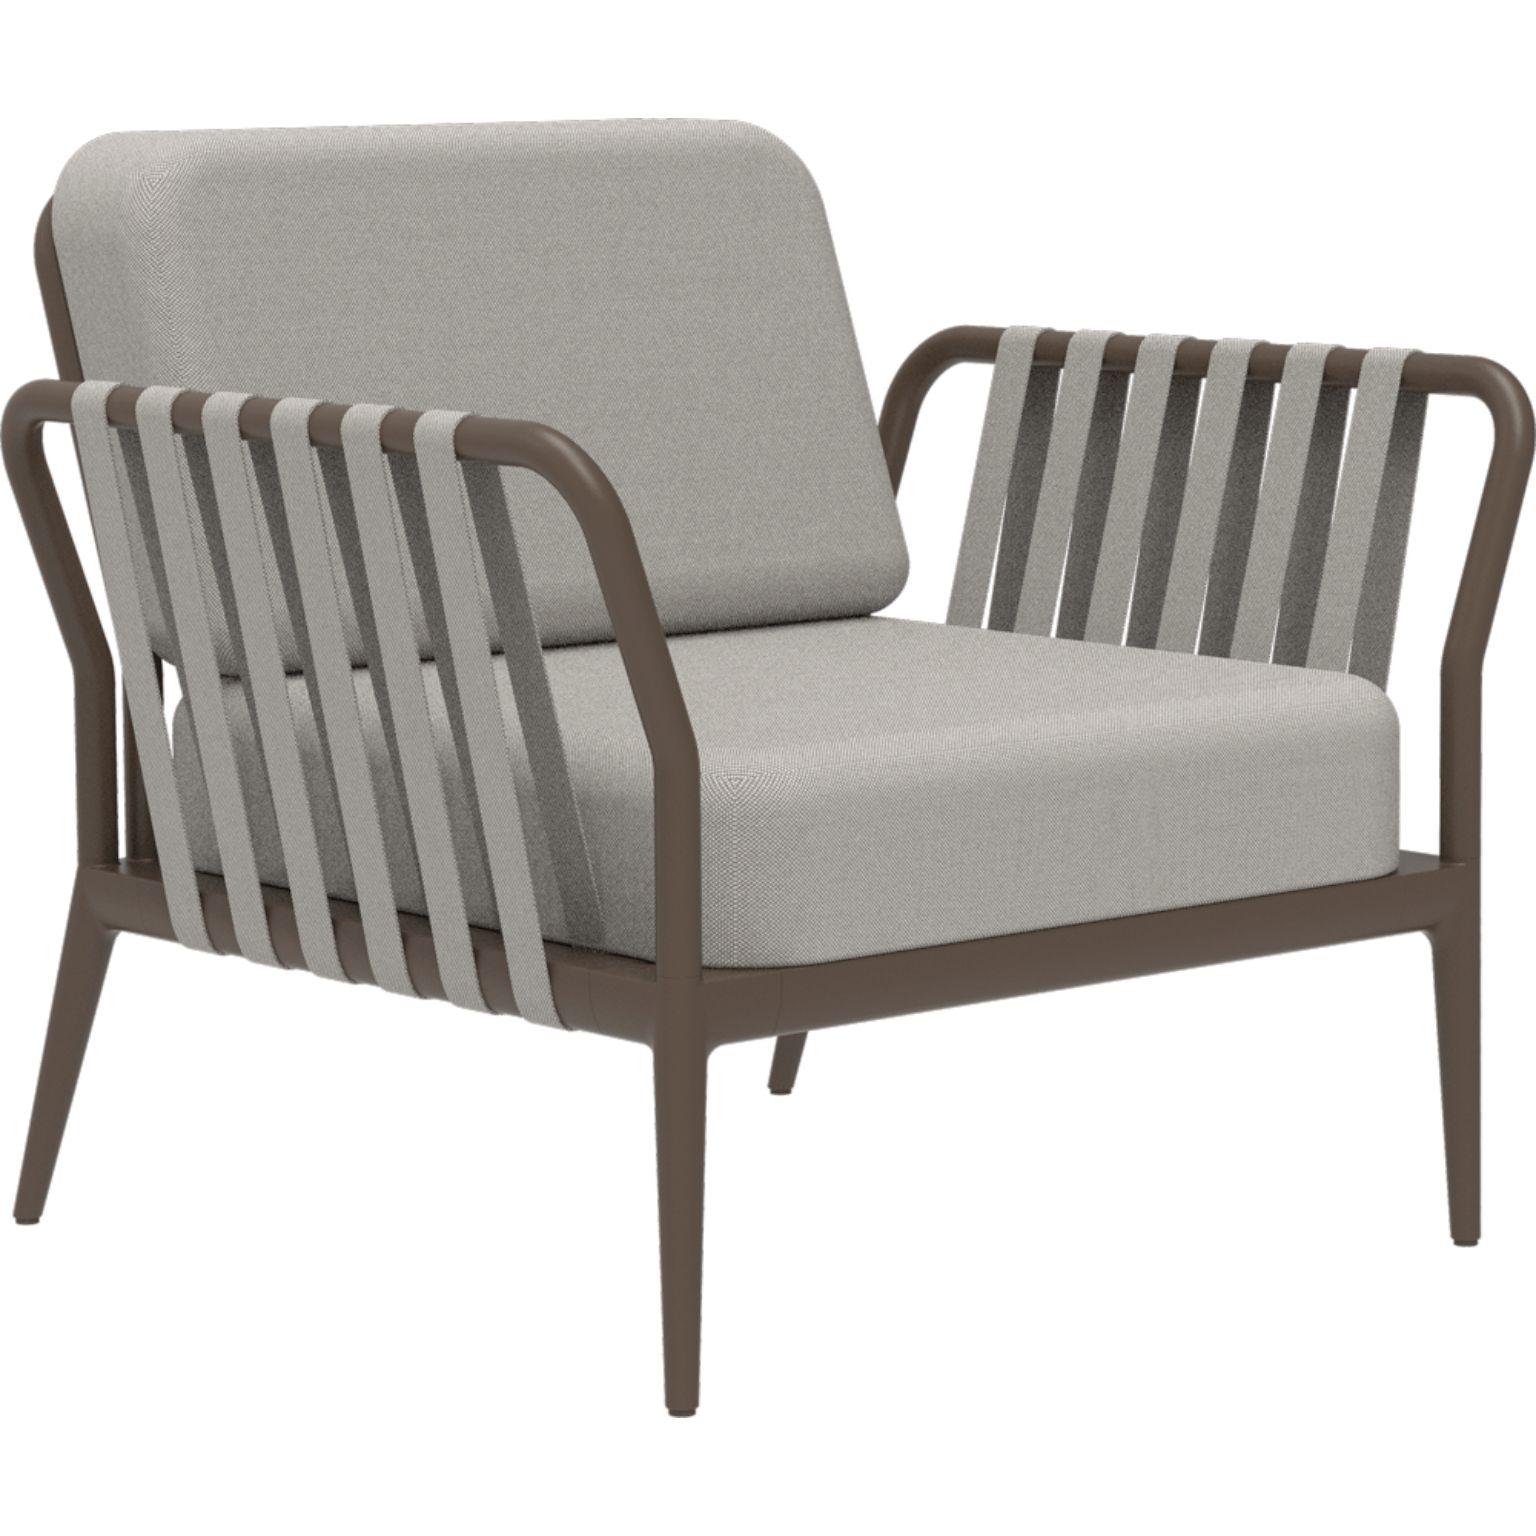 Ribbons Bronze armchair by MOWEE
Dimensions: D83 x W91 x H81 cm (Seat Height 42 cm)
Material: Aluminum, Upholstery
Weight: 20 kg
Also Available in different colors and finishes. 

An unmistakable collection for its beauty and robustness. A